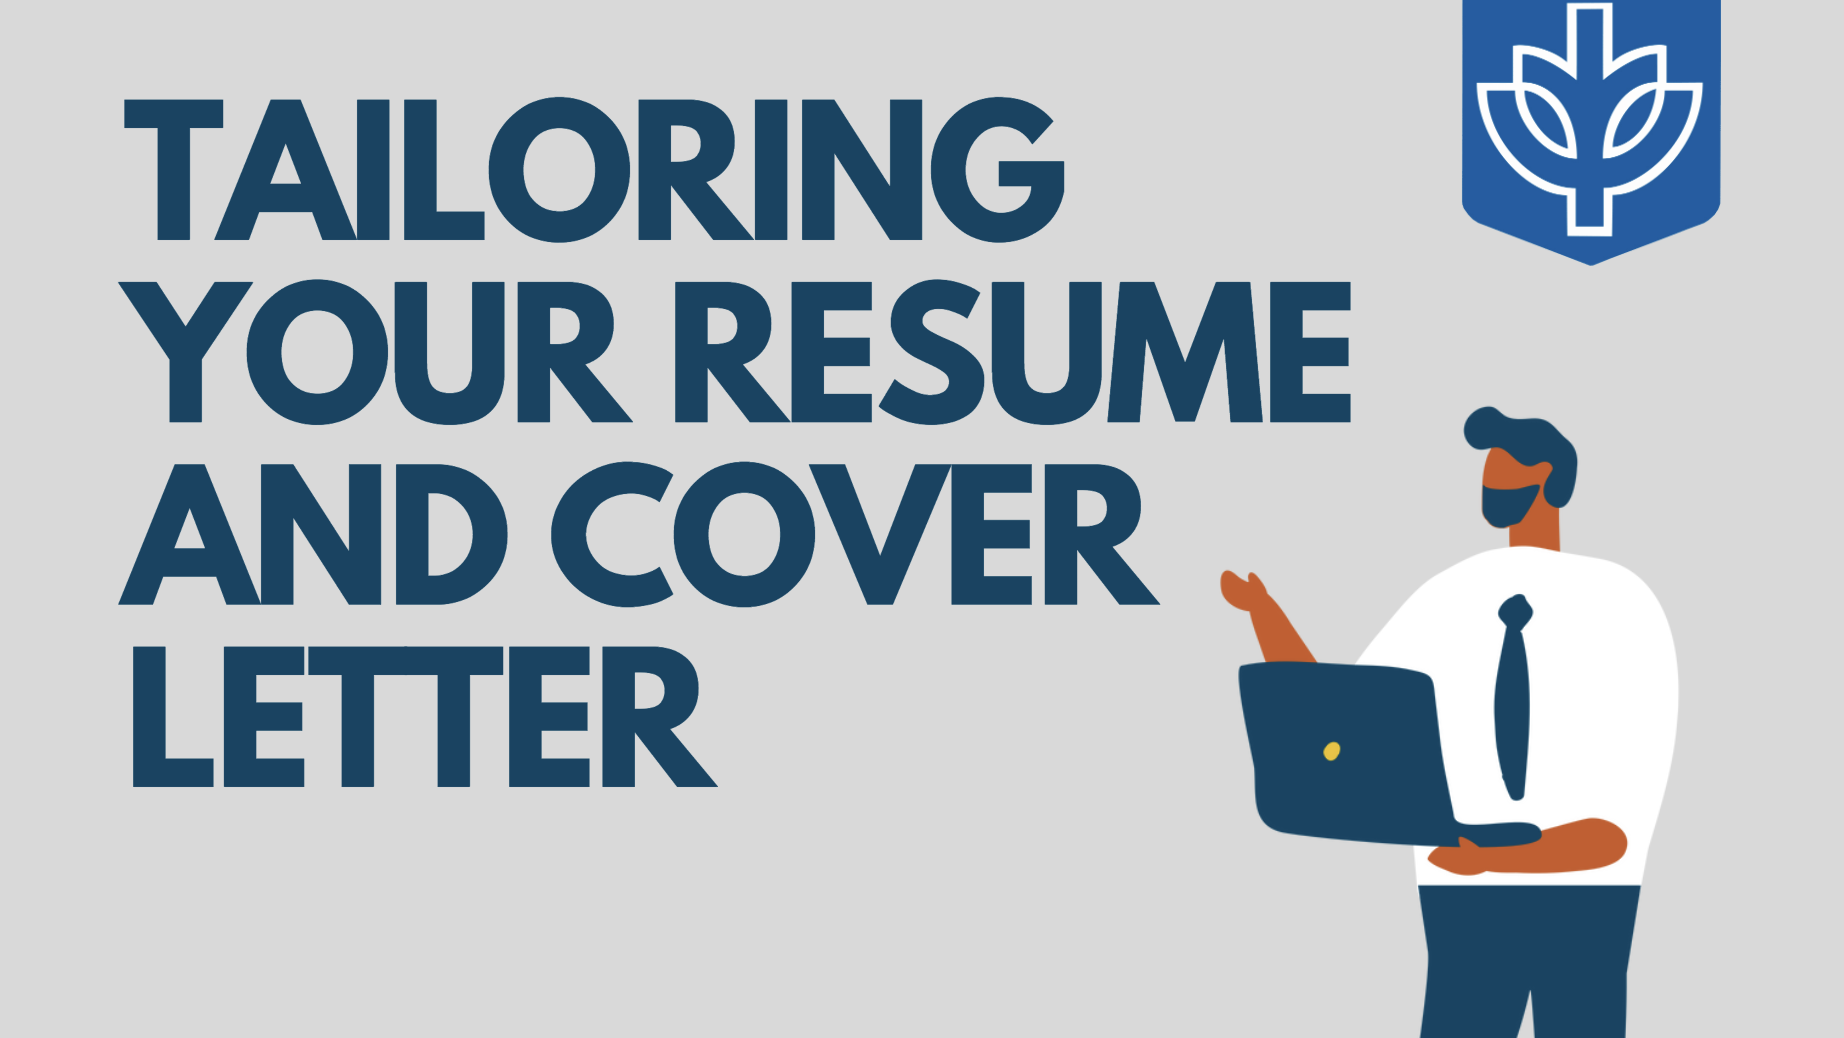 Tailoring Your Resume and Cover Letter